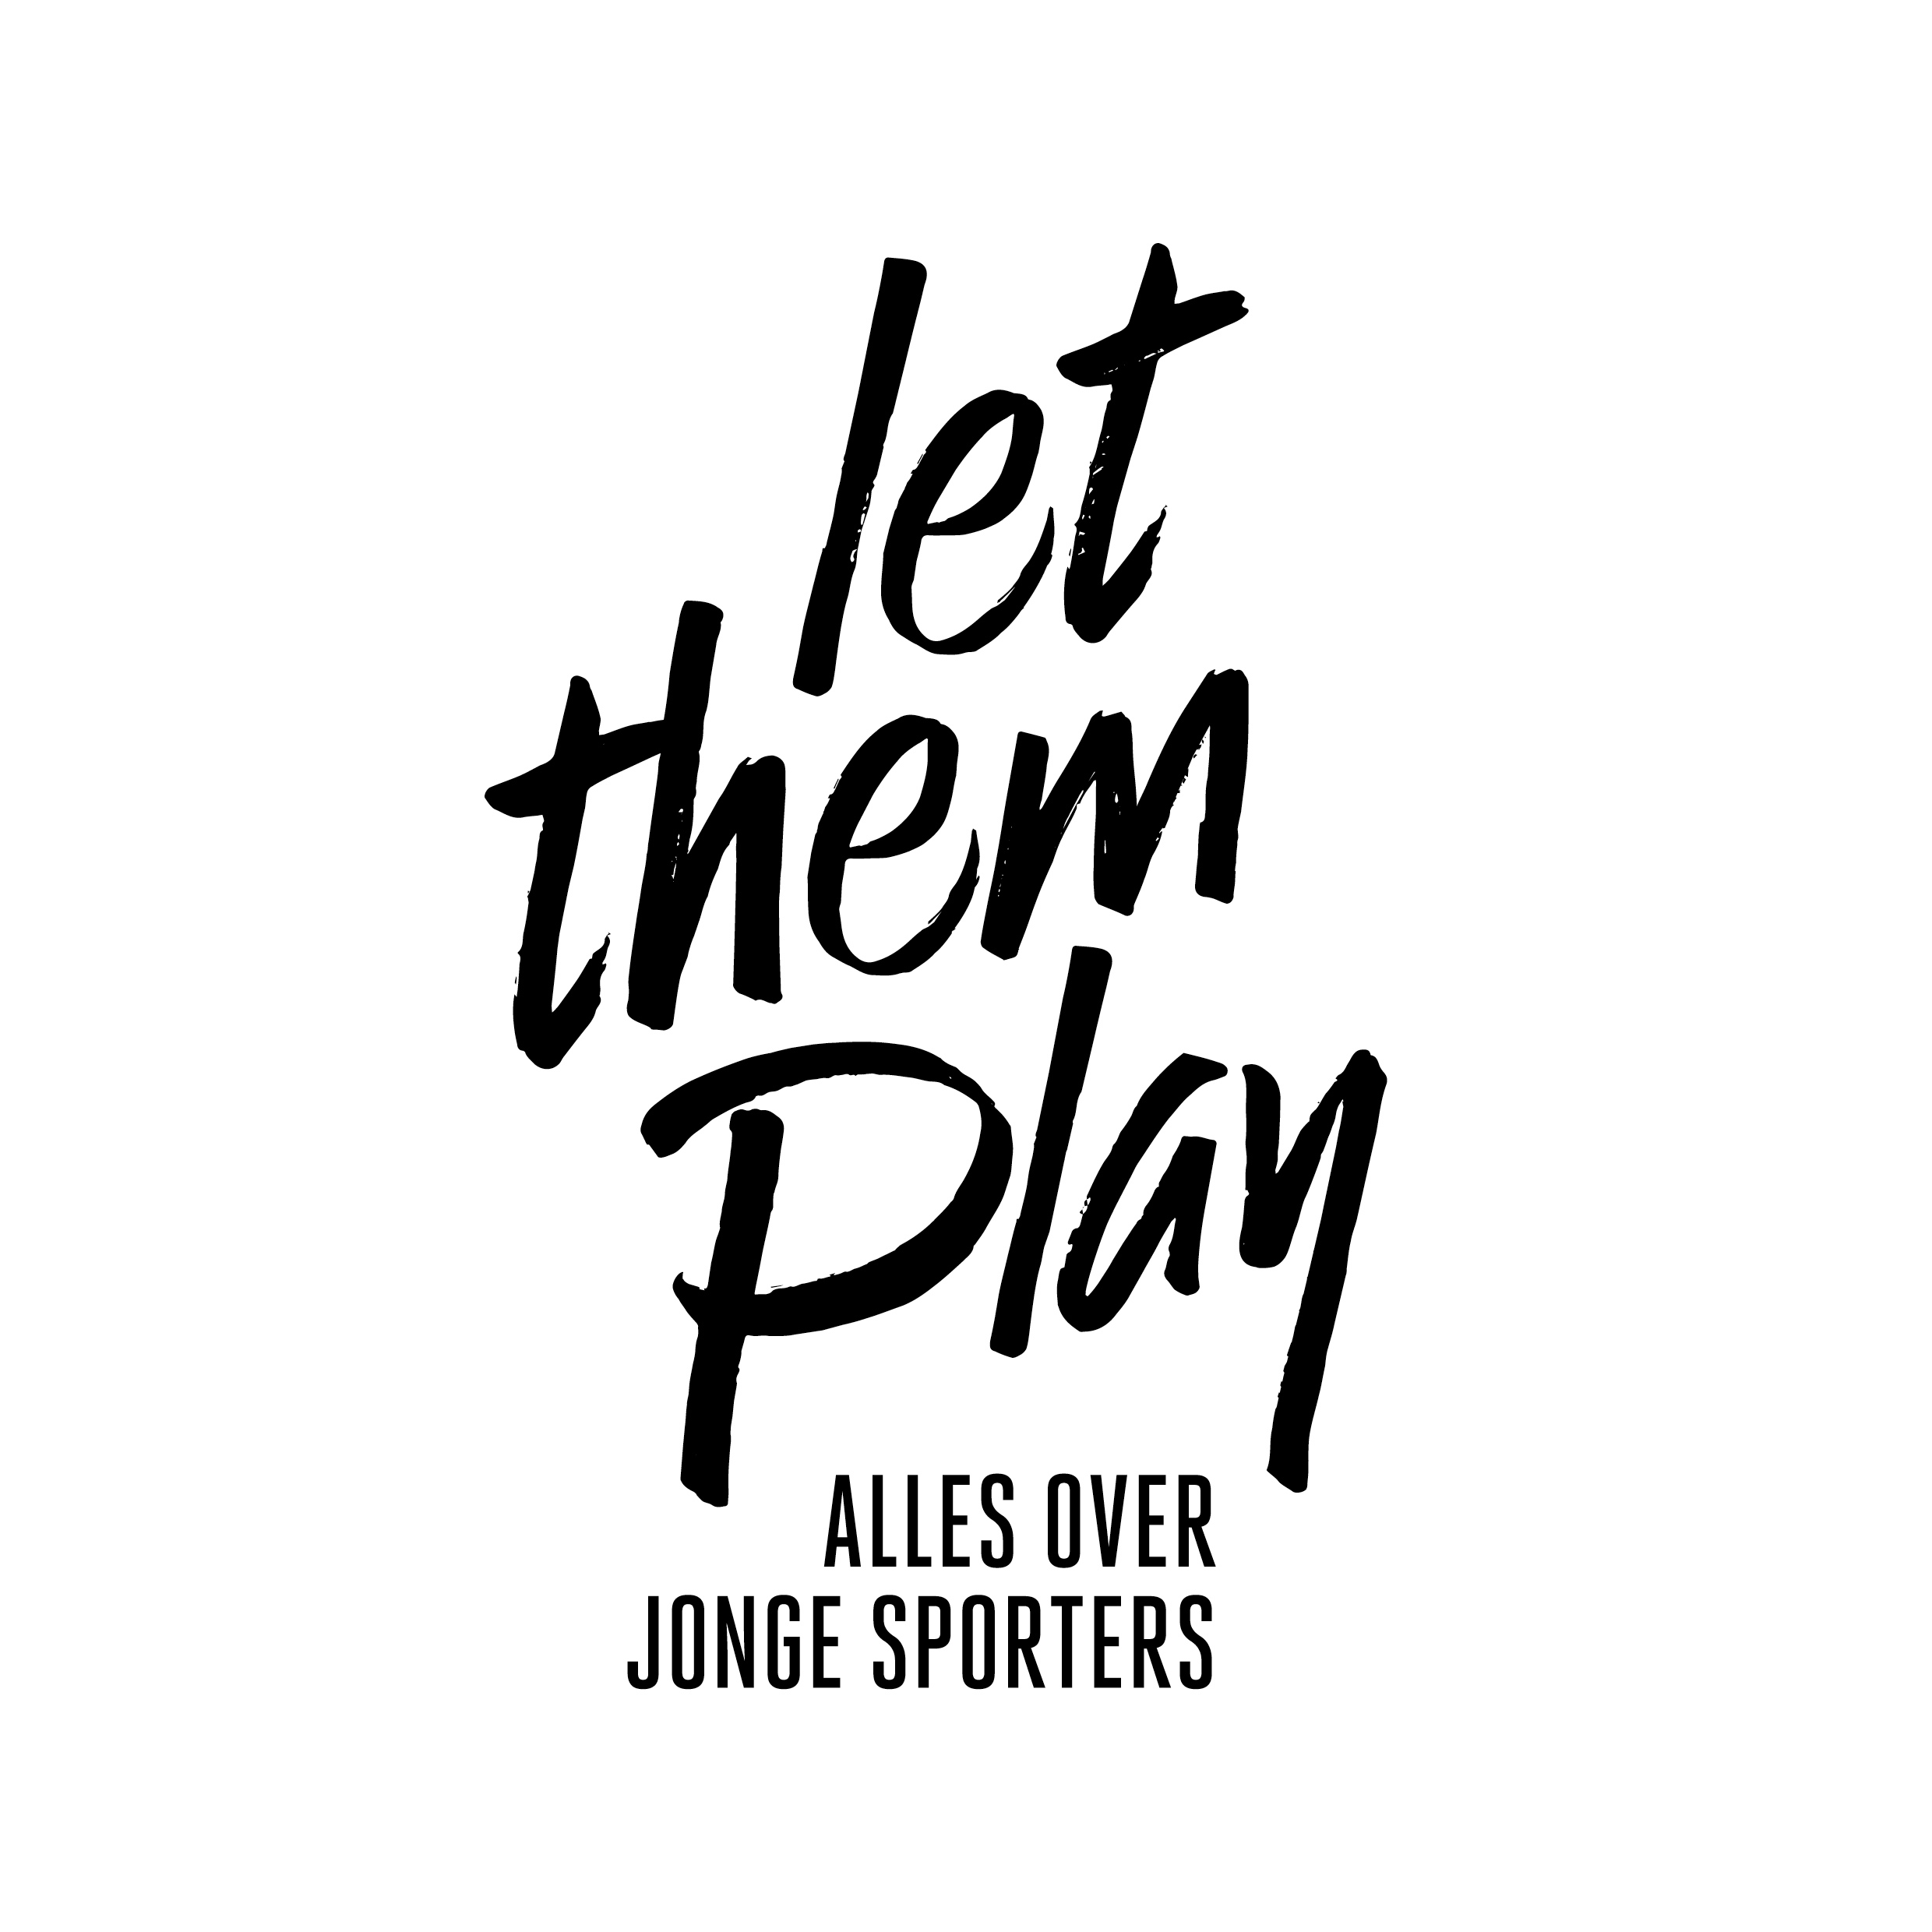 Let Them Play